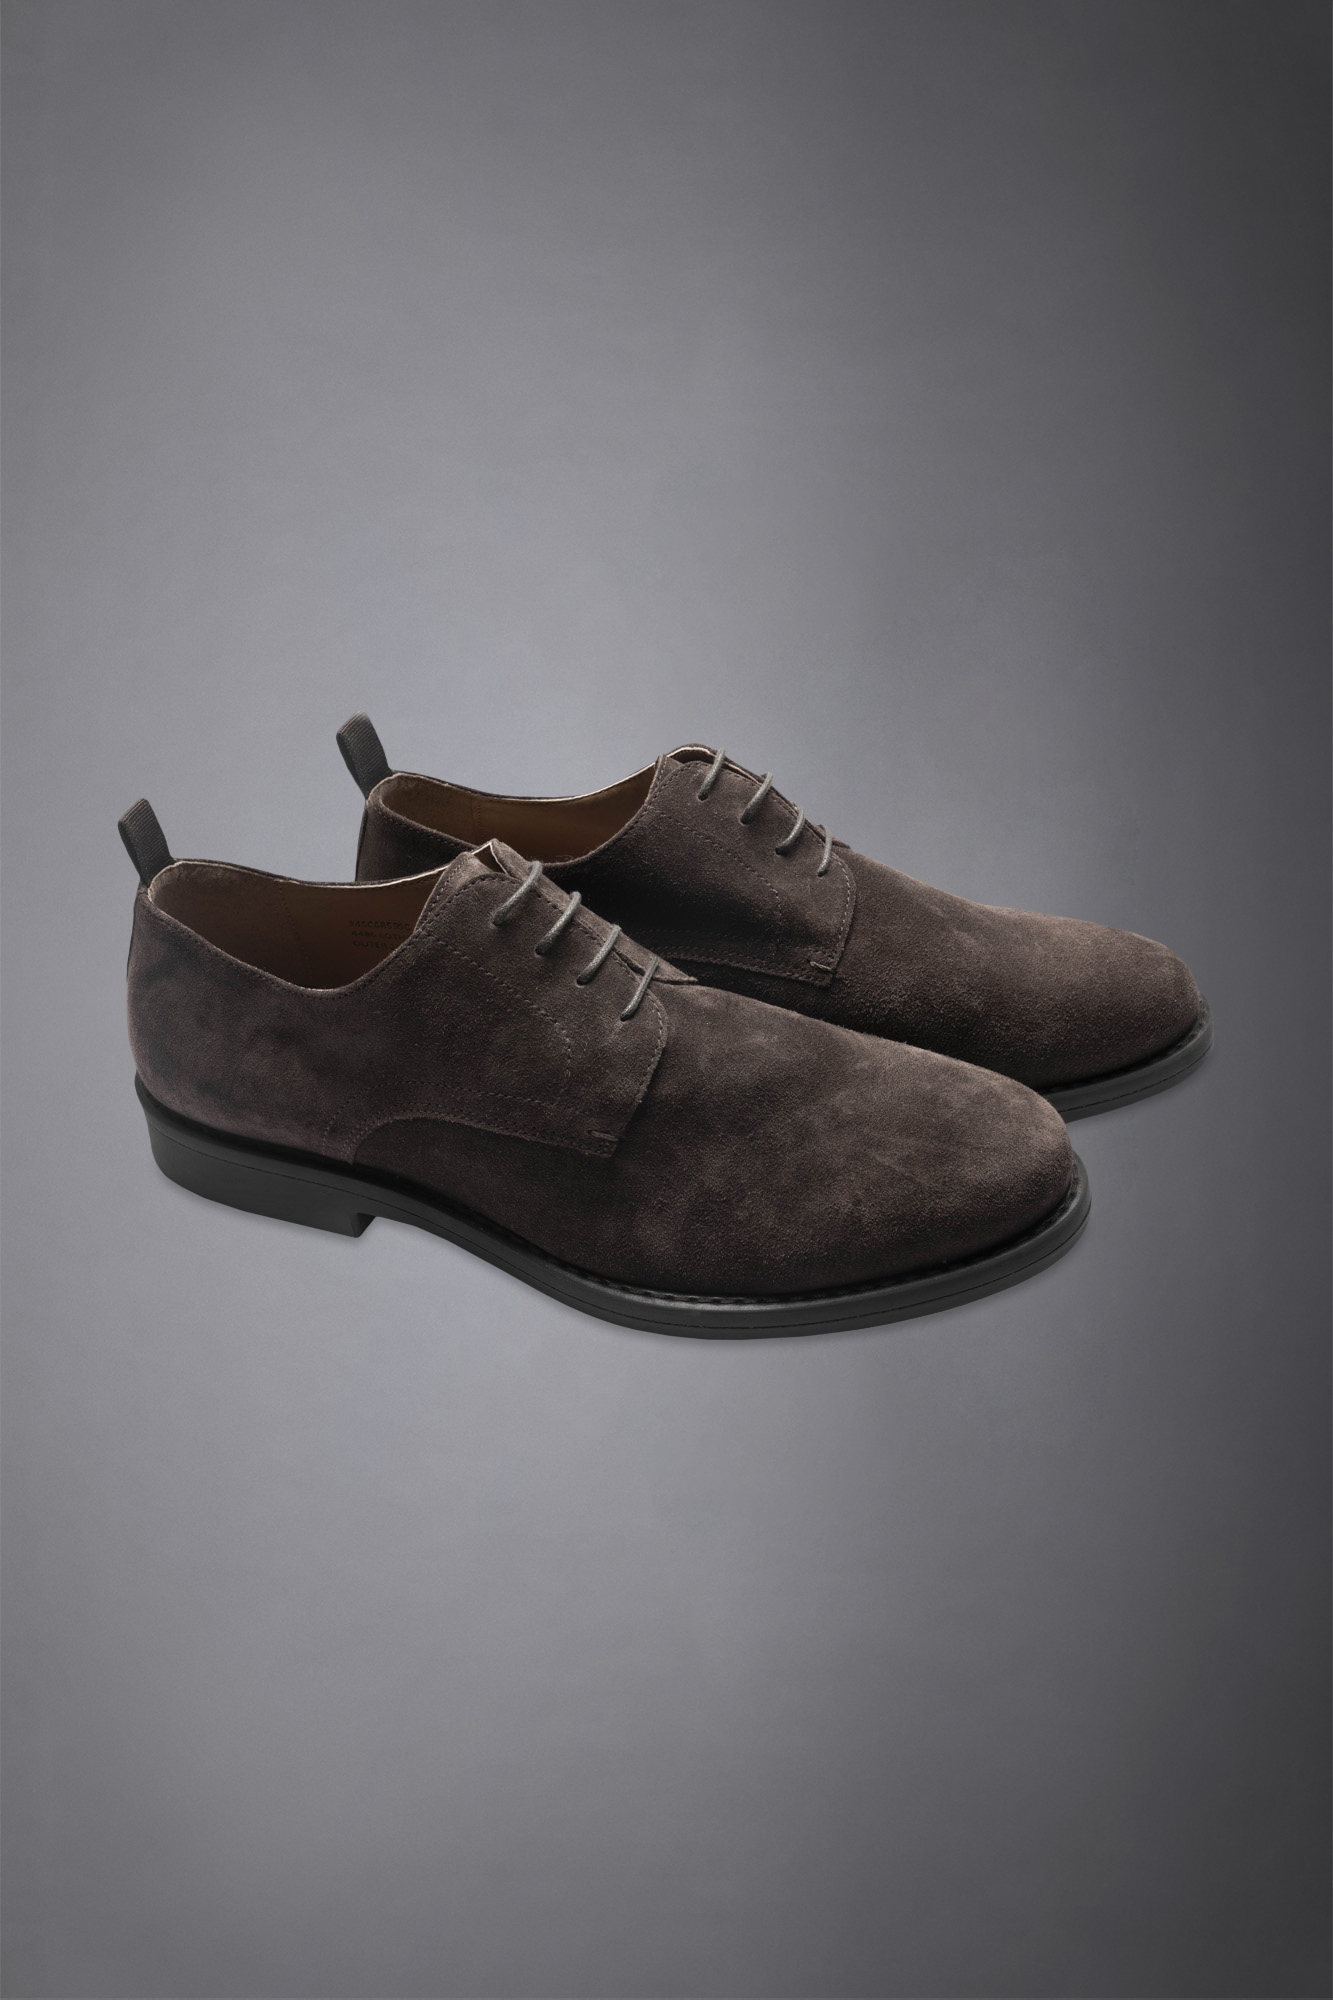 100% suede leather derby shoe with rubber sole